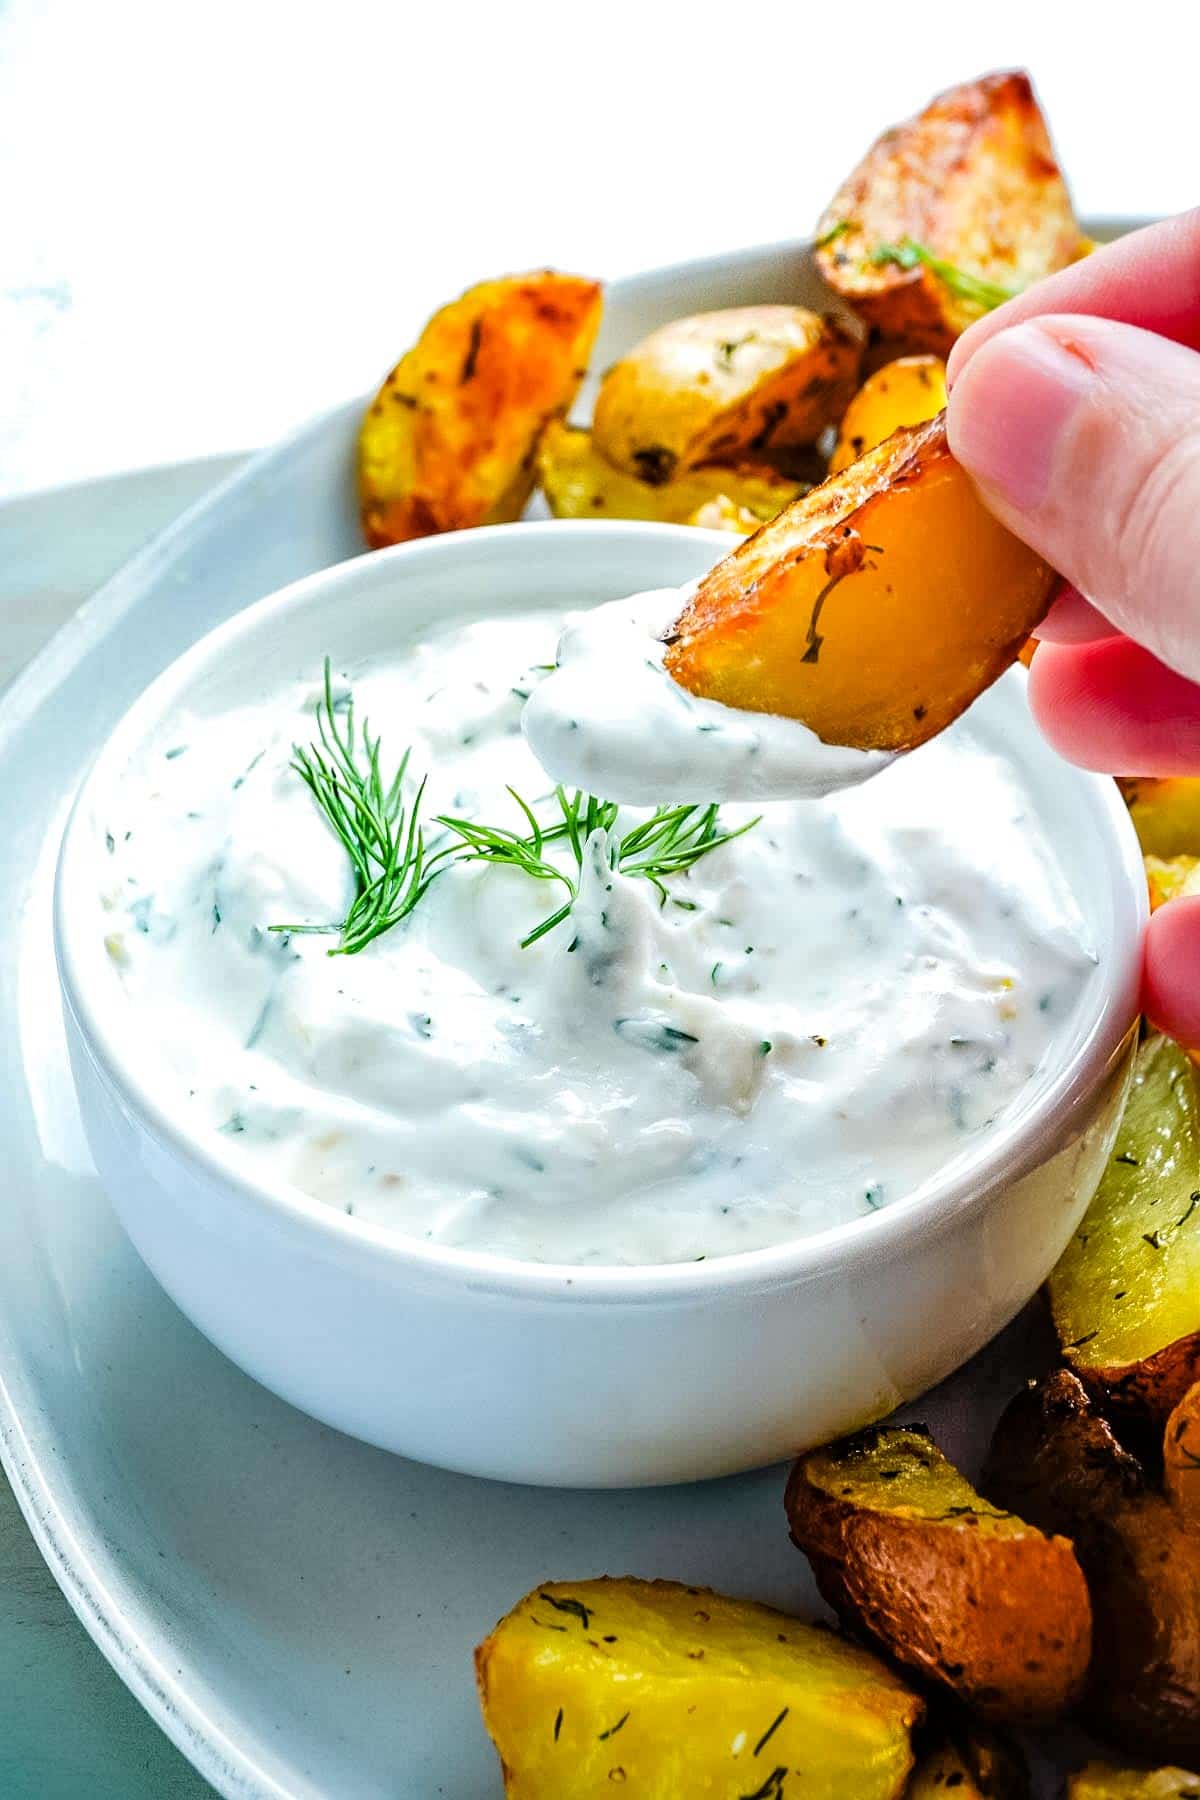 A Roasted Potatoes bring dipped into yogurt dill sauce.